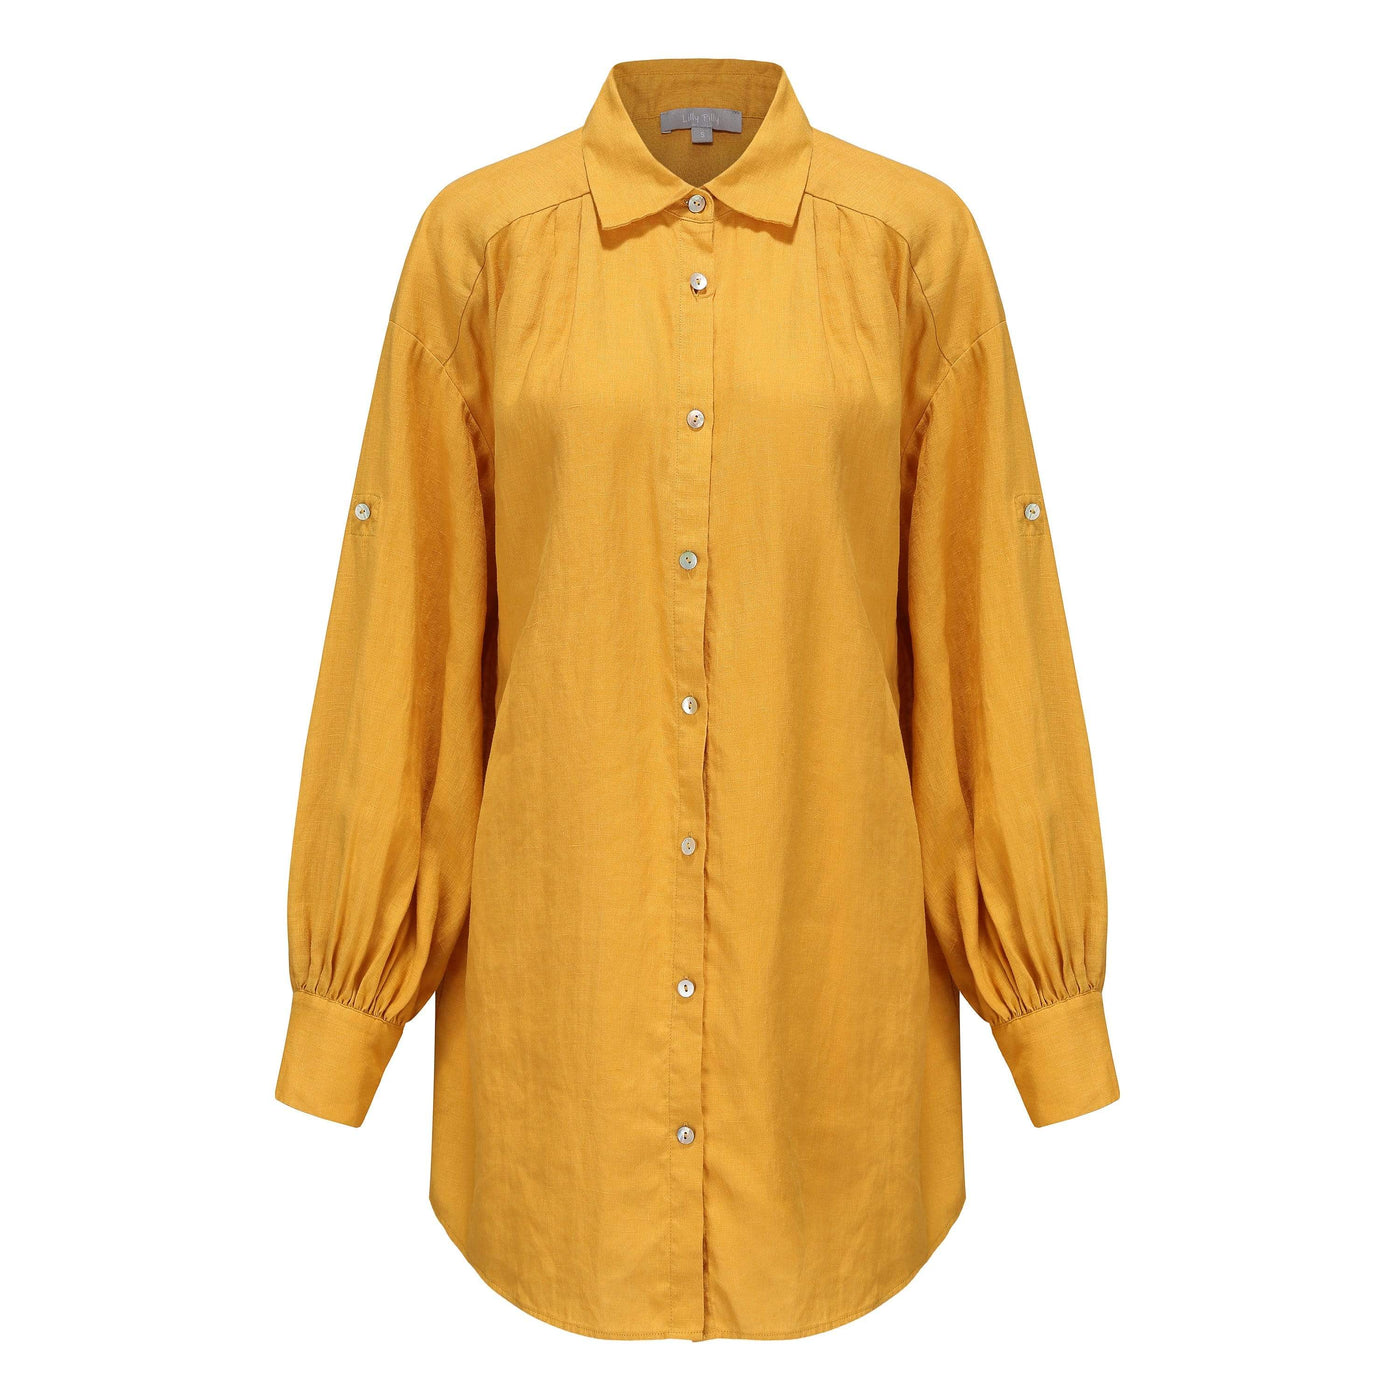 Lilly Pilly Collection 100% organic linen Billie Shirt Dress in Sunflower as 3D image showing front view